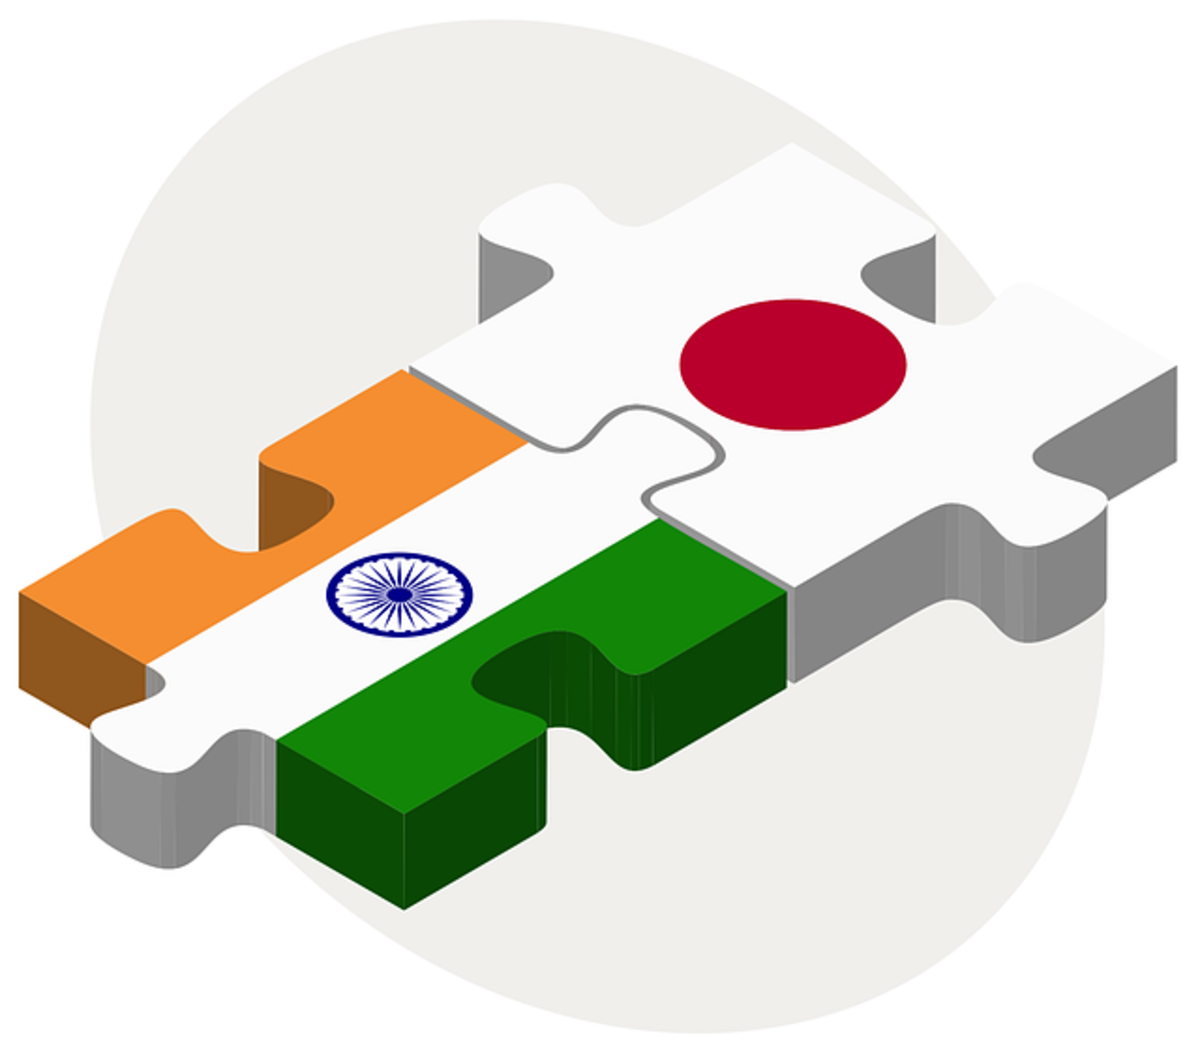 Why Is Japan Continuously Investing in India Despite the Latter's Economic Slowdown?